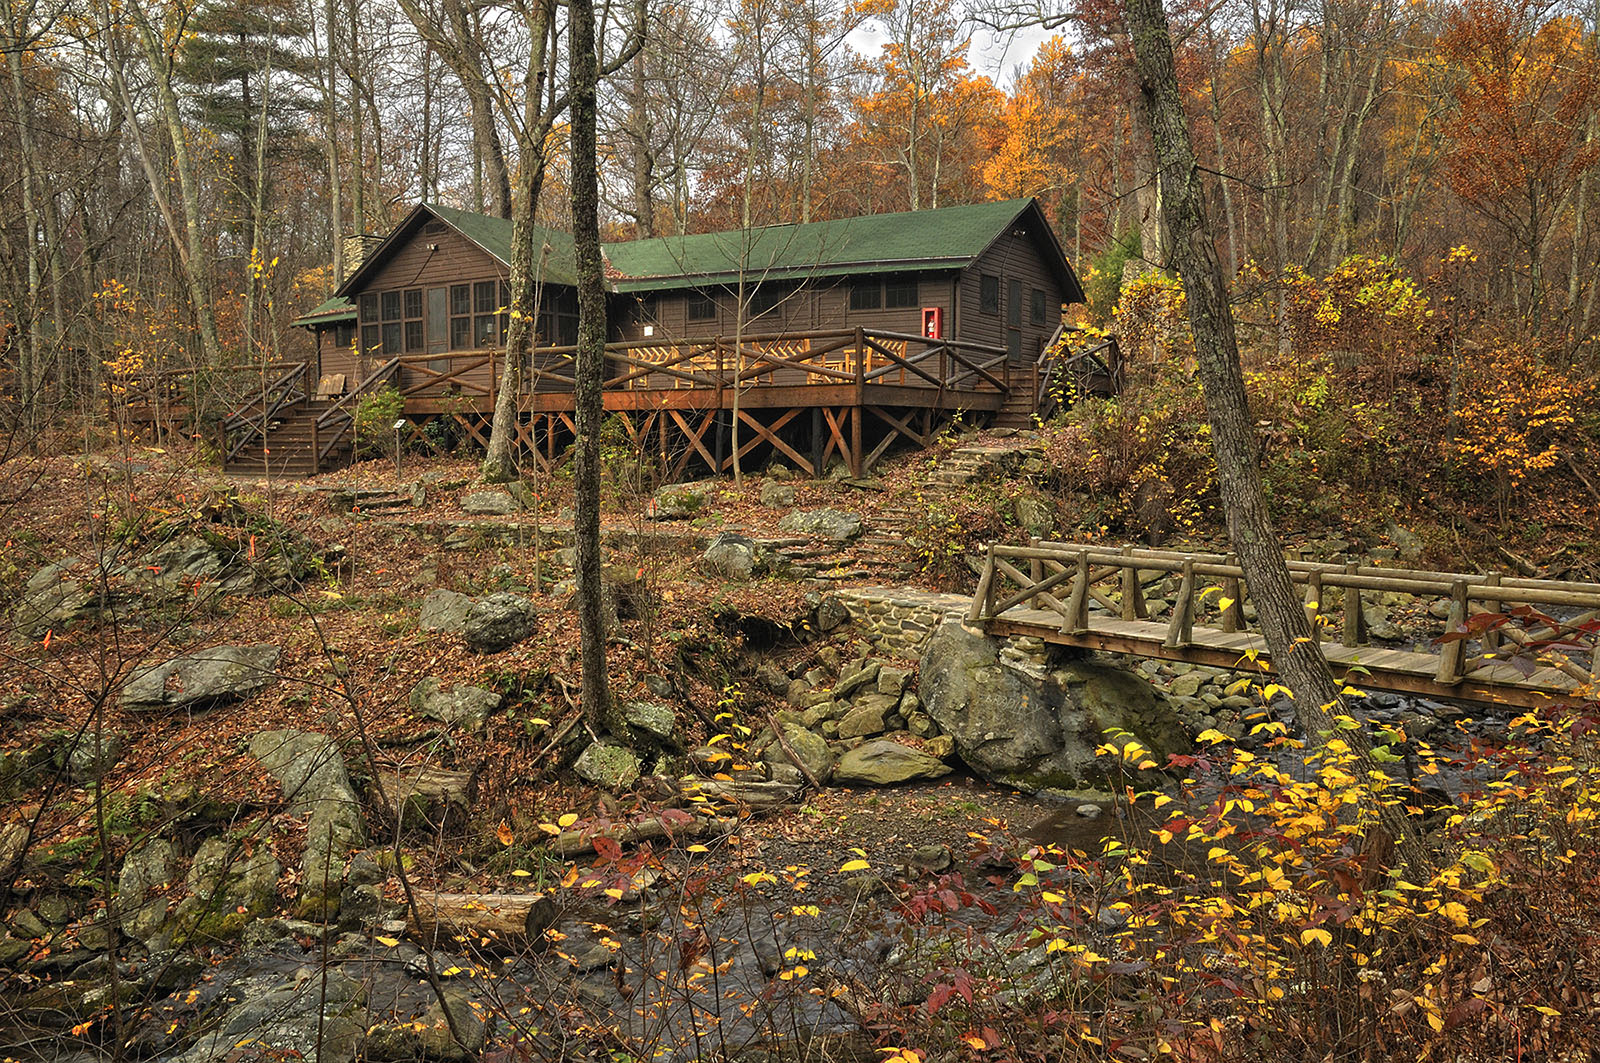 A color photo of The Brown House, as wooden residence built overlooking a rocky slope to a small river. 